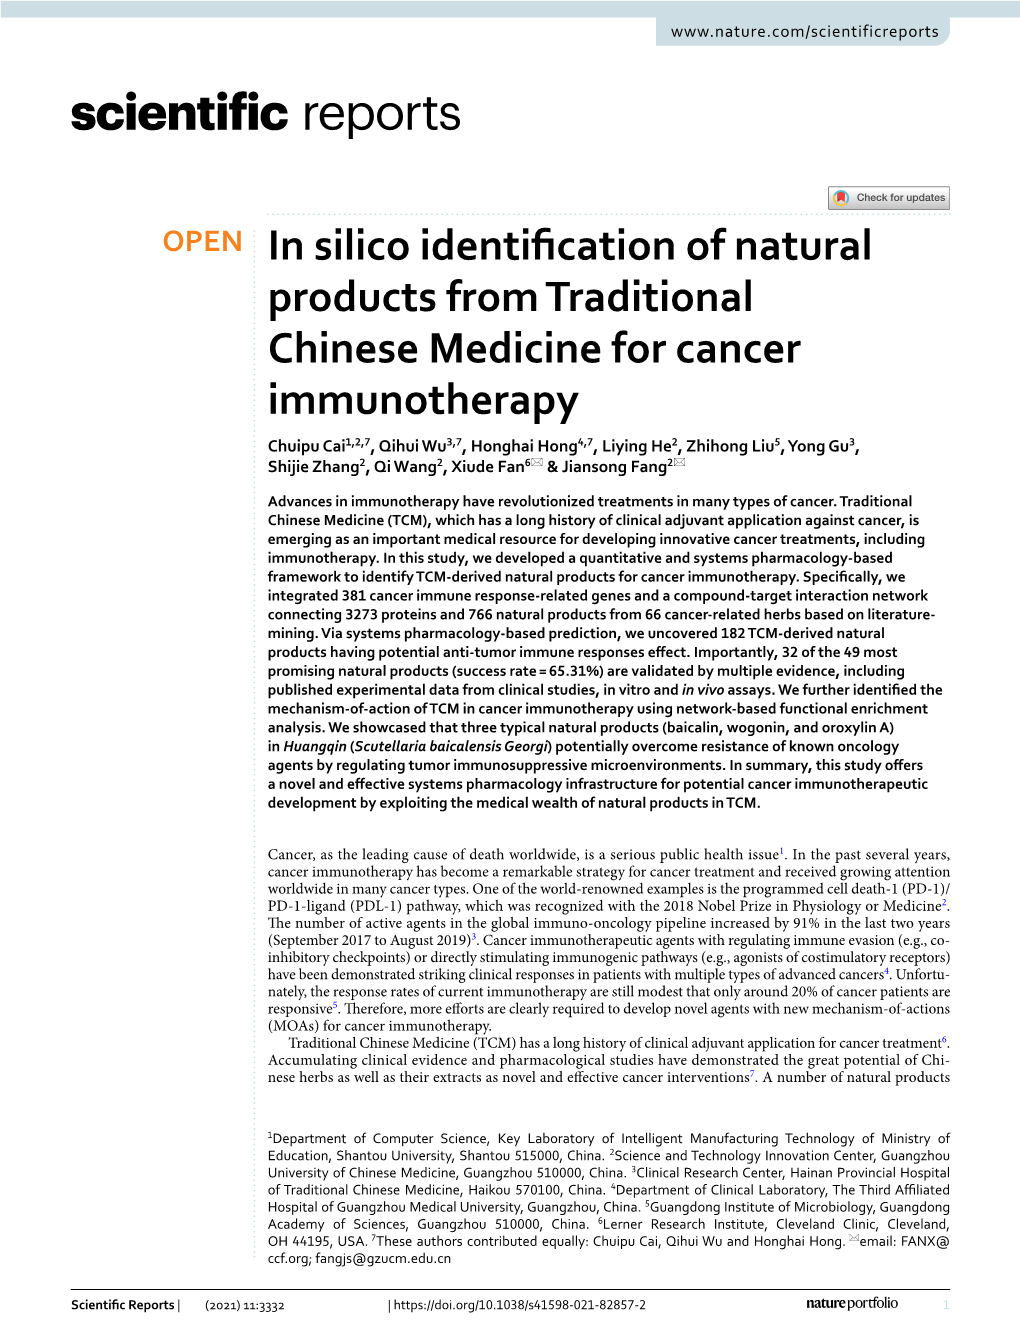 In Silico Identification of Natural Products from Traditional Chinese